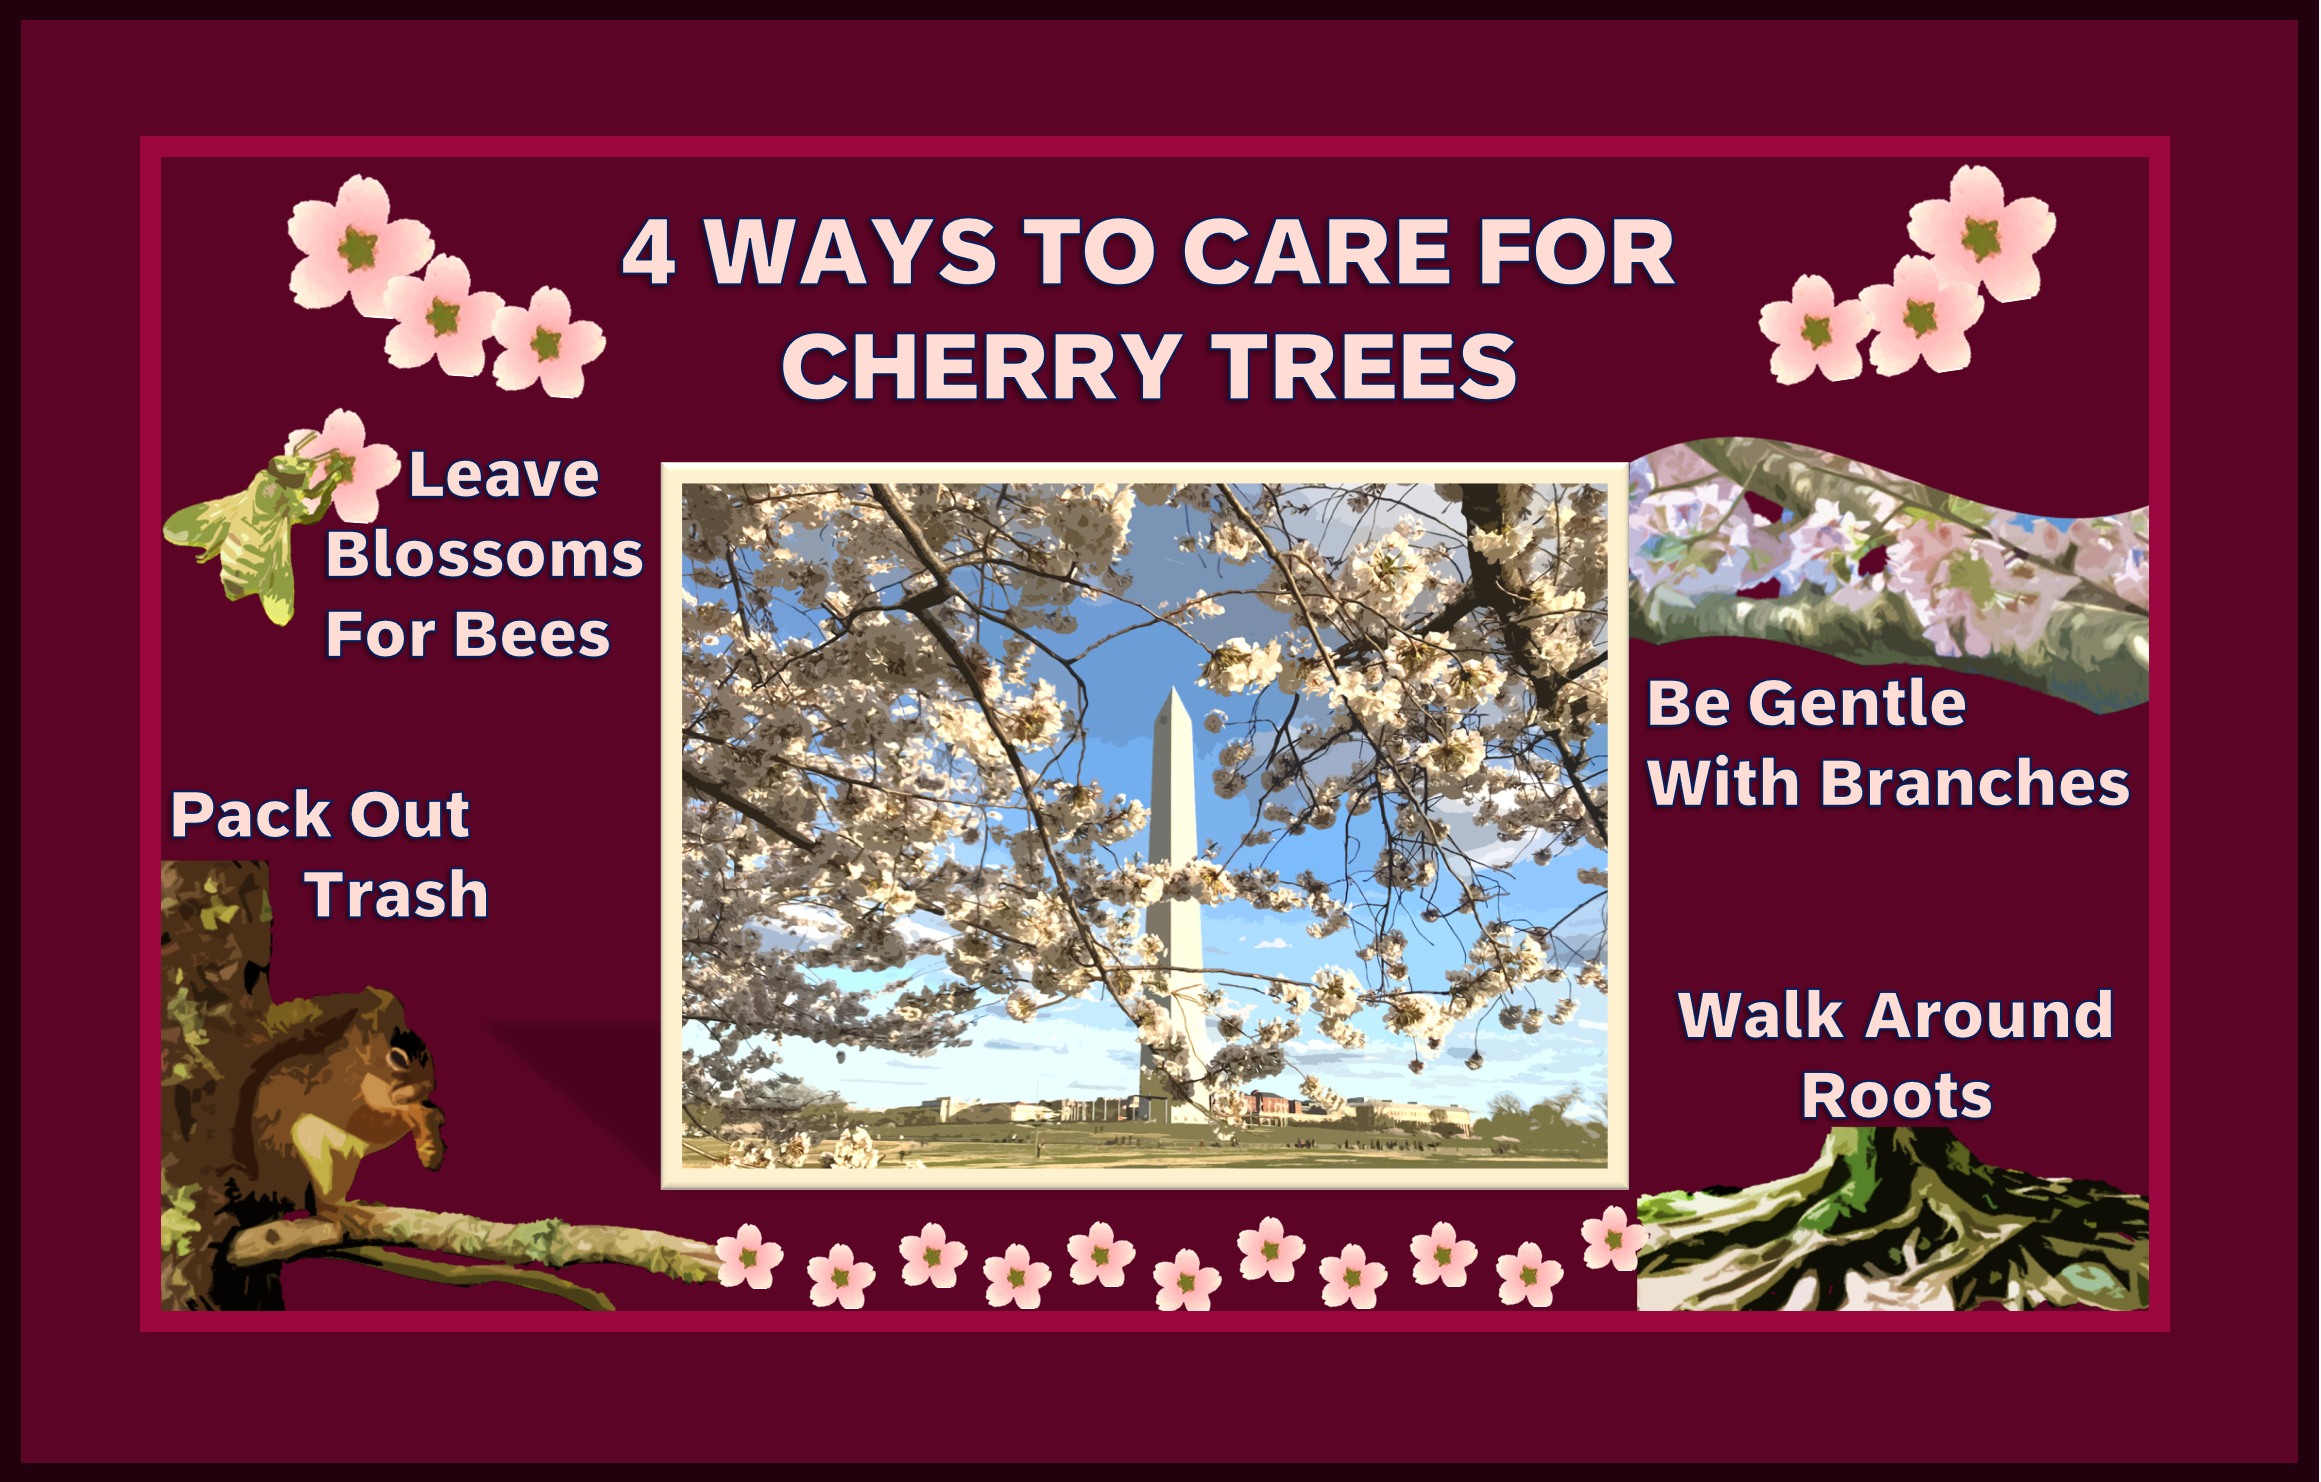 Four Ways to Care for Cherry Trees infographic